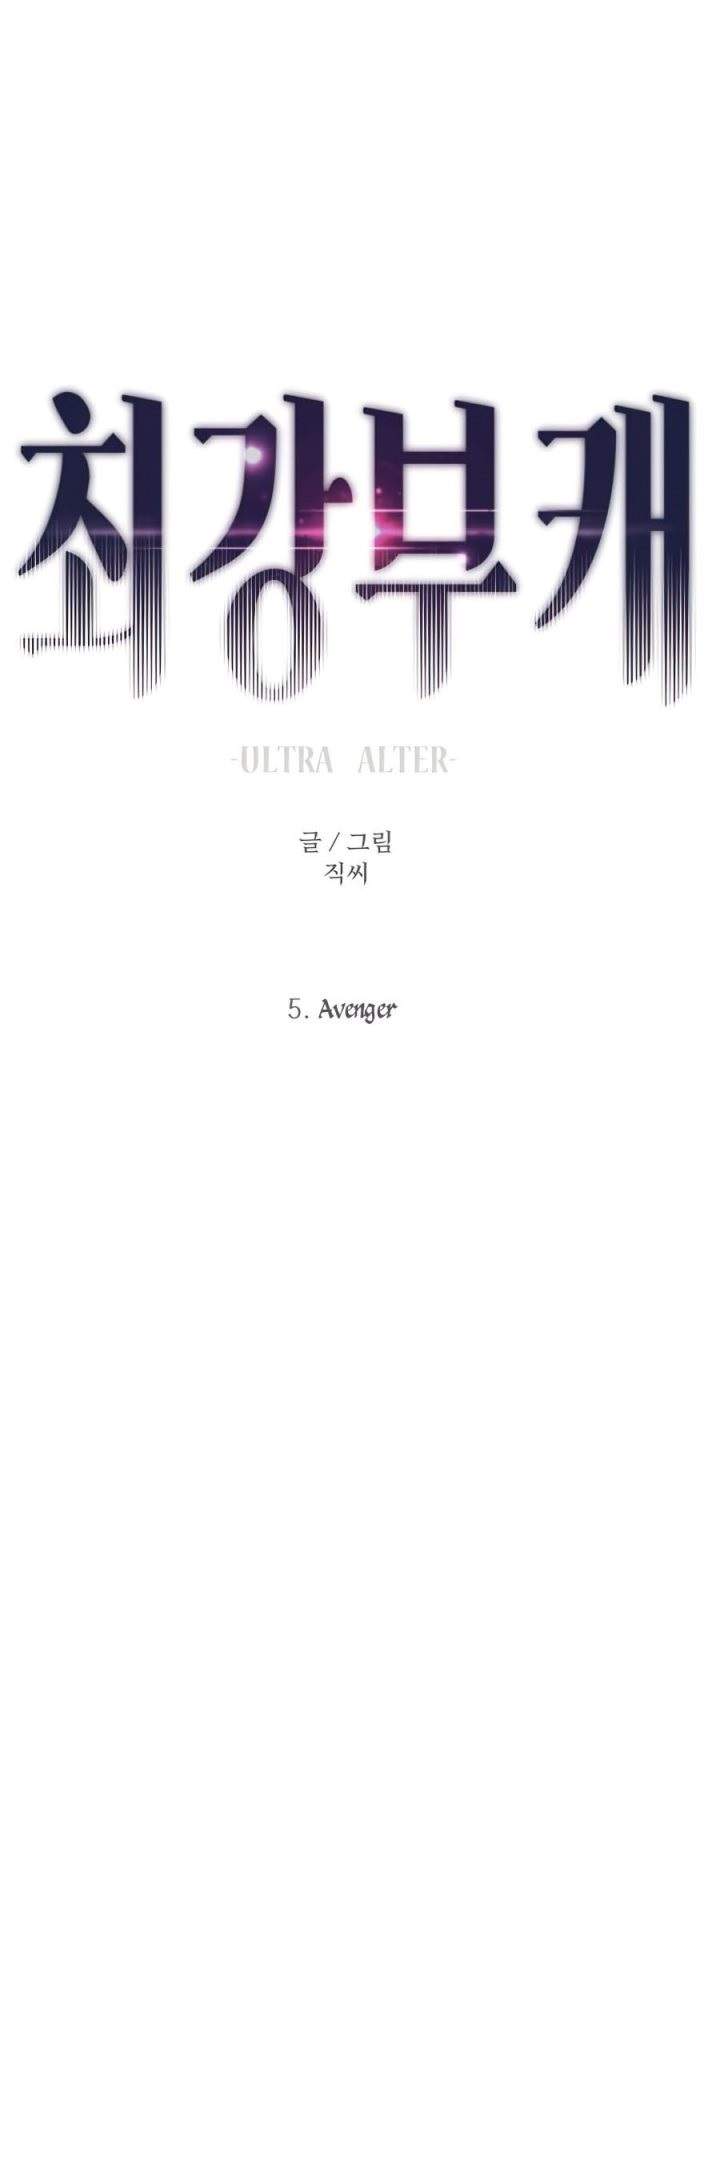 Ultra Alter Chapter 5